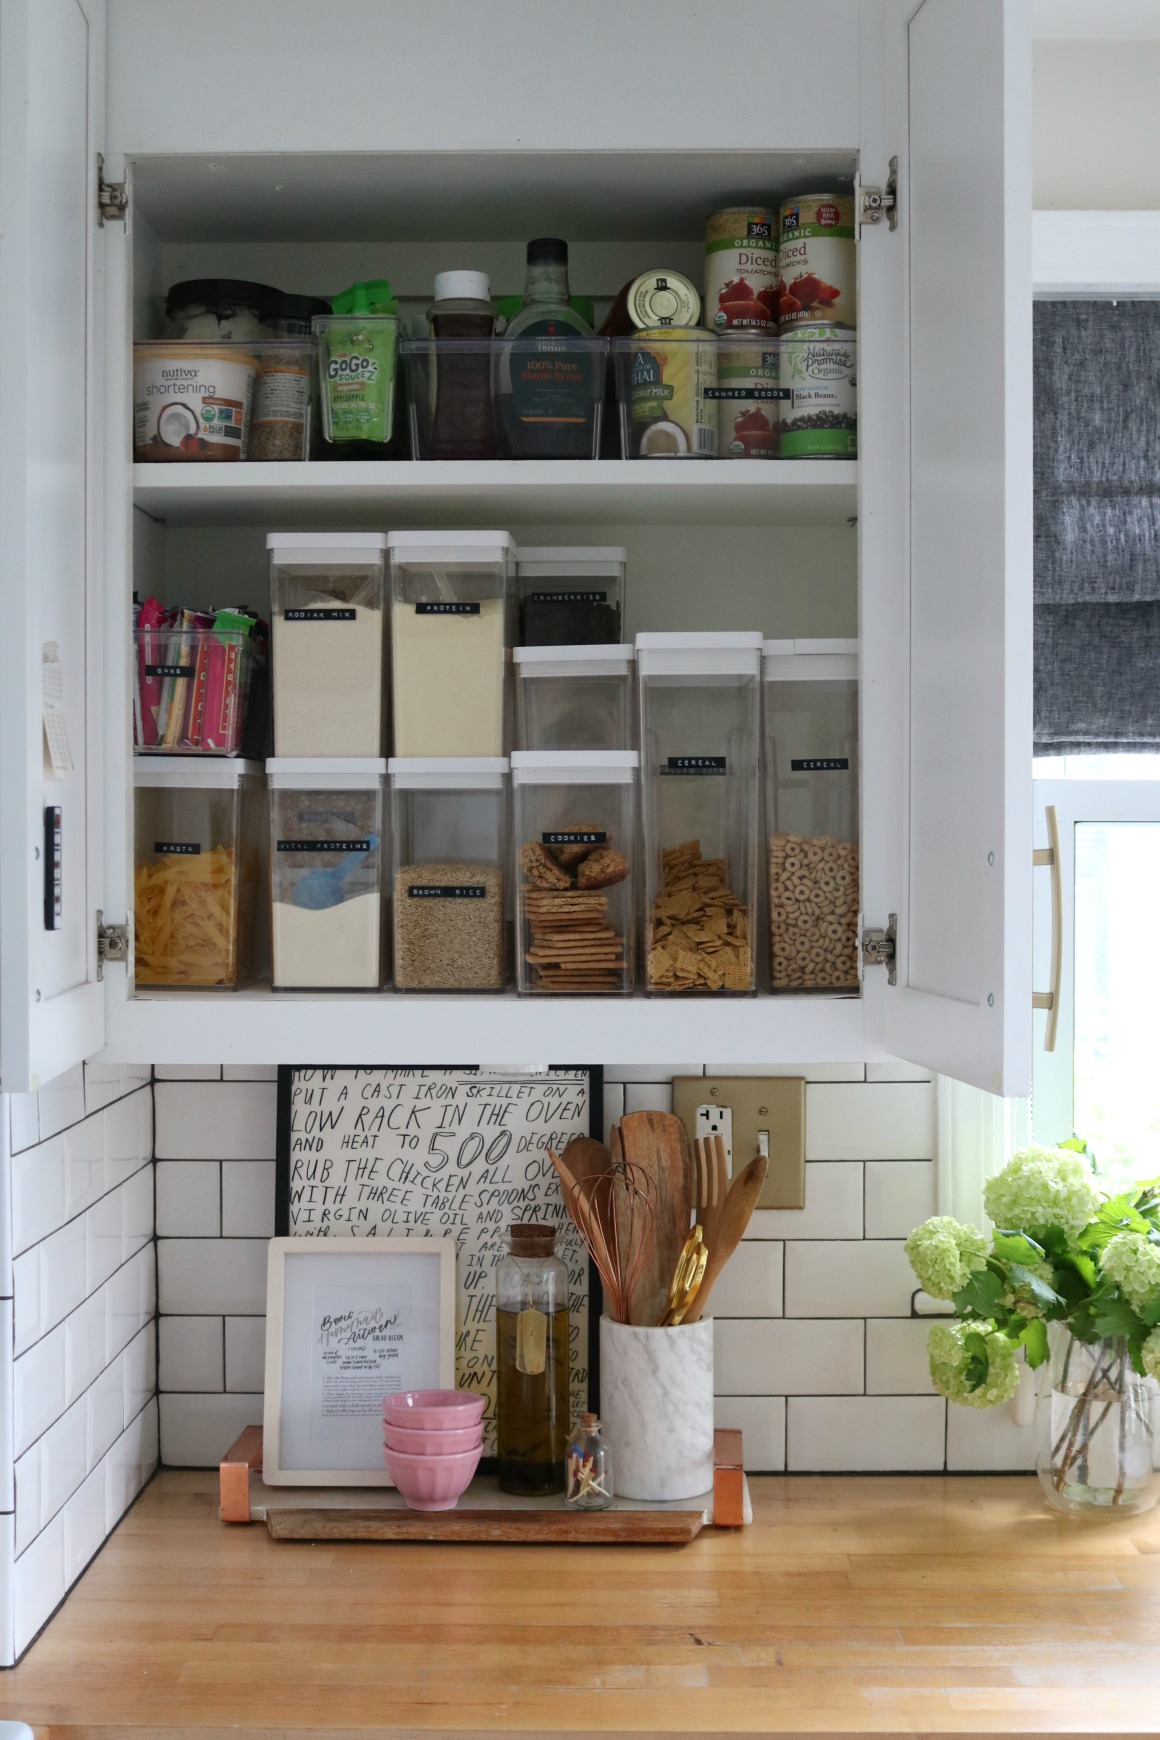 Kitchen Organizing Tips - Small Space Living